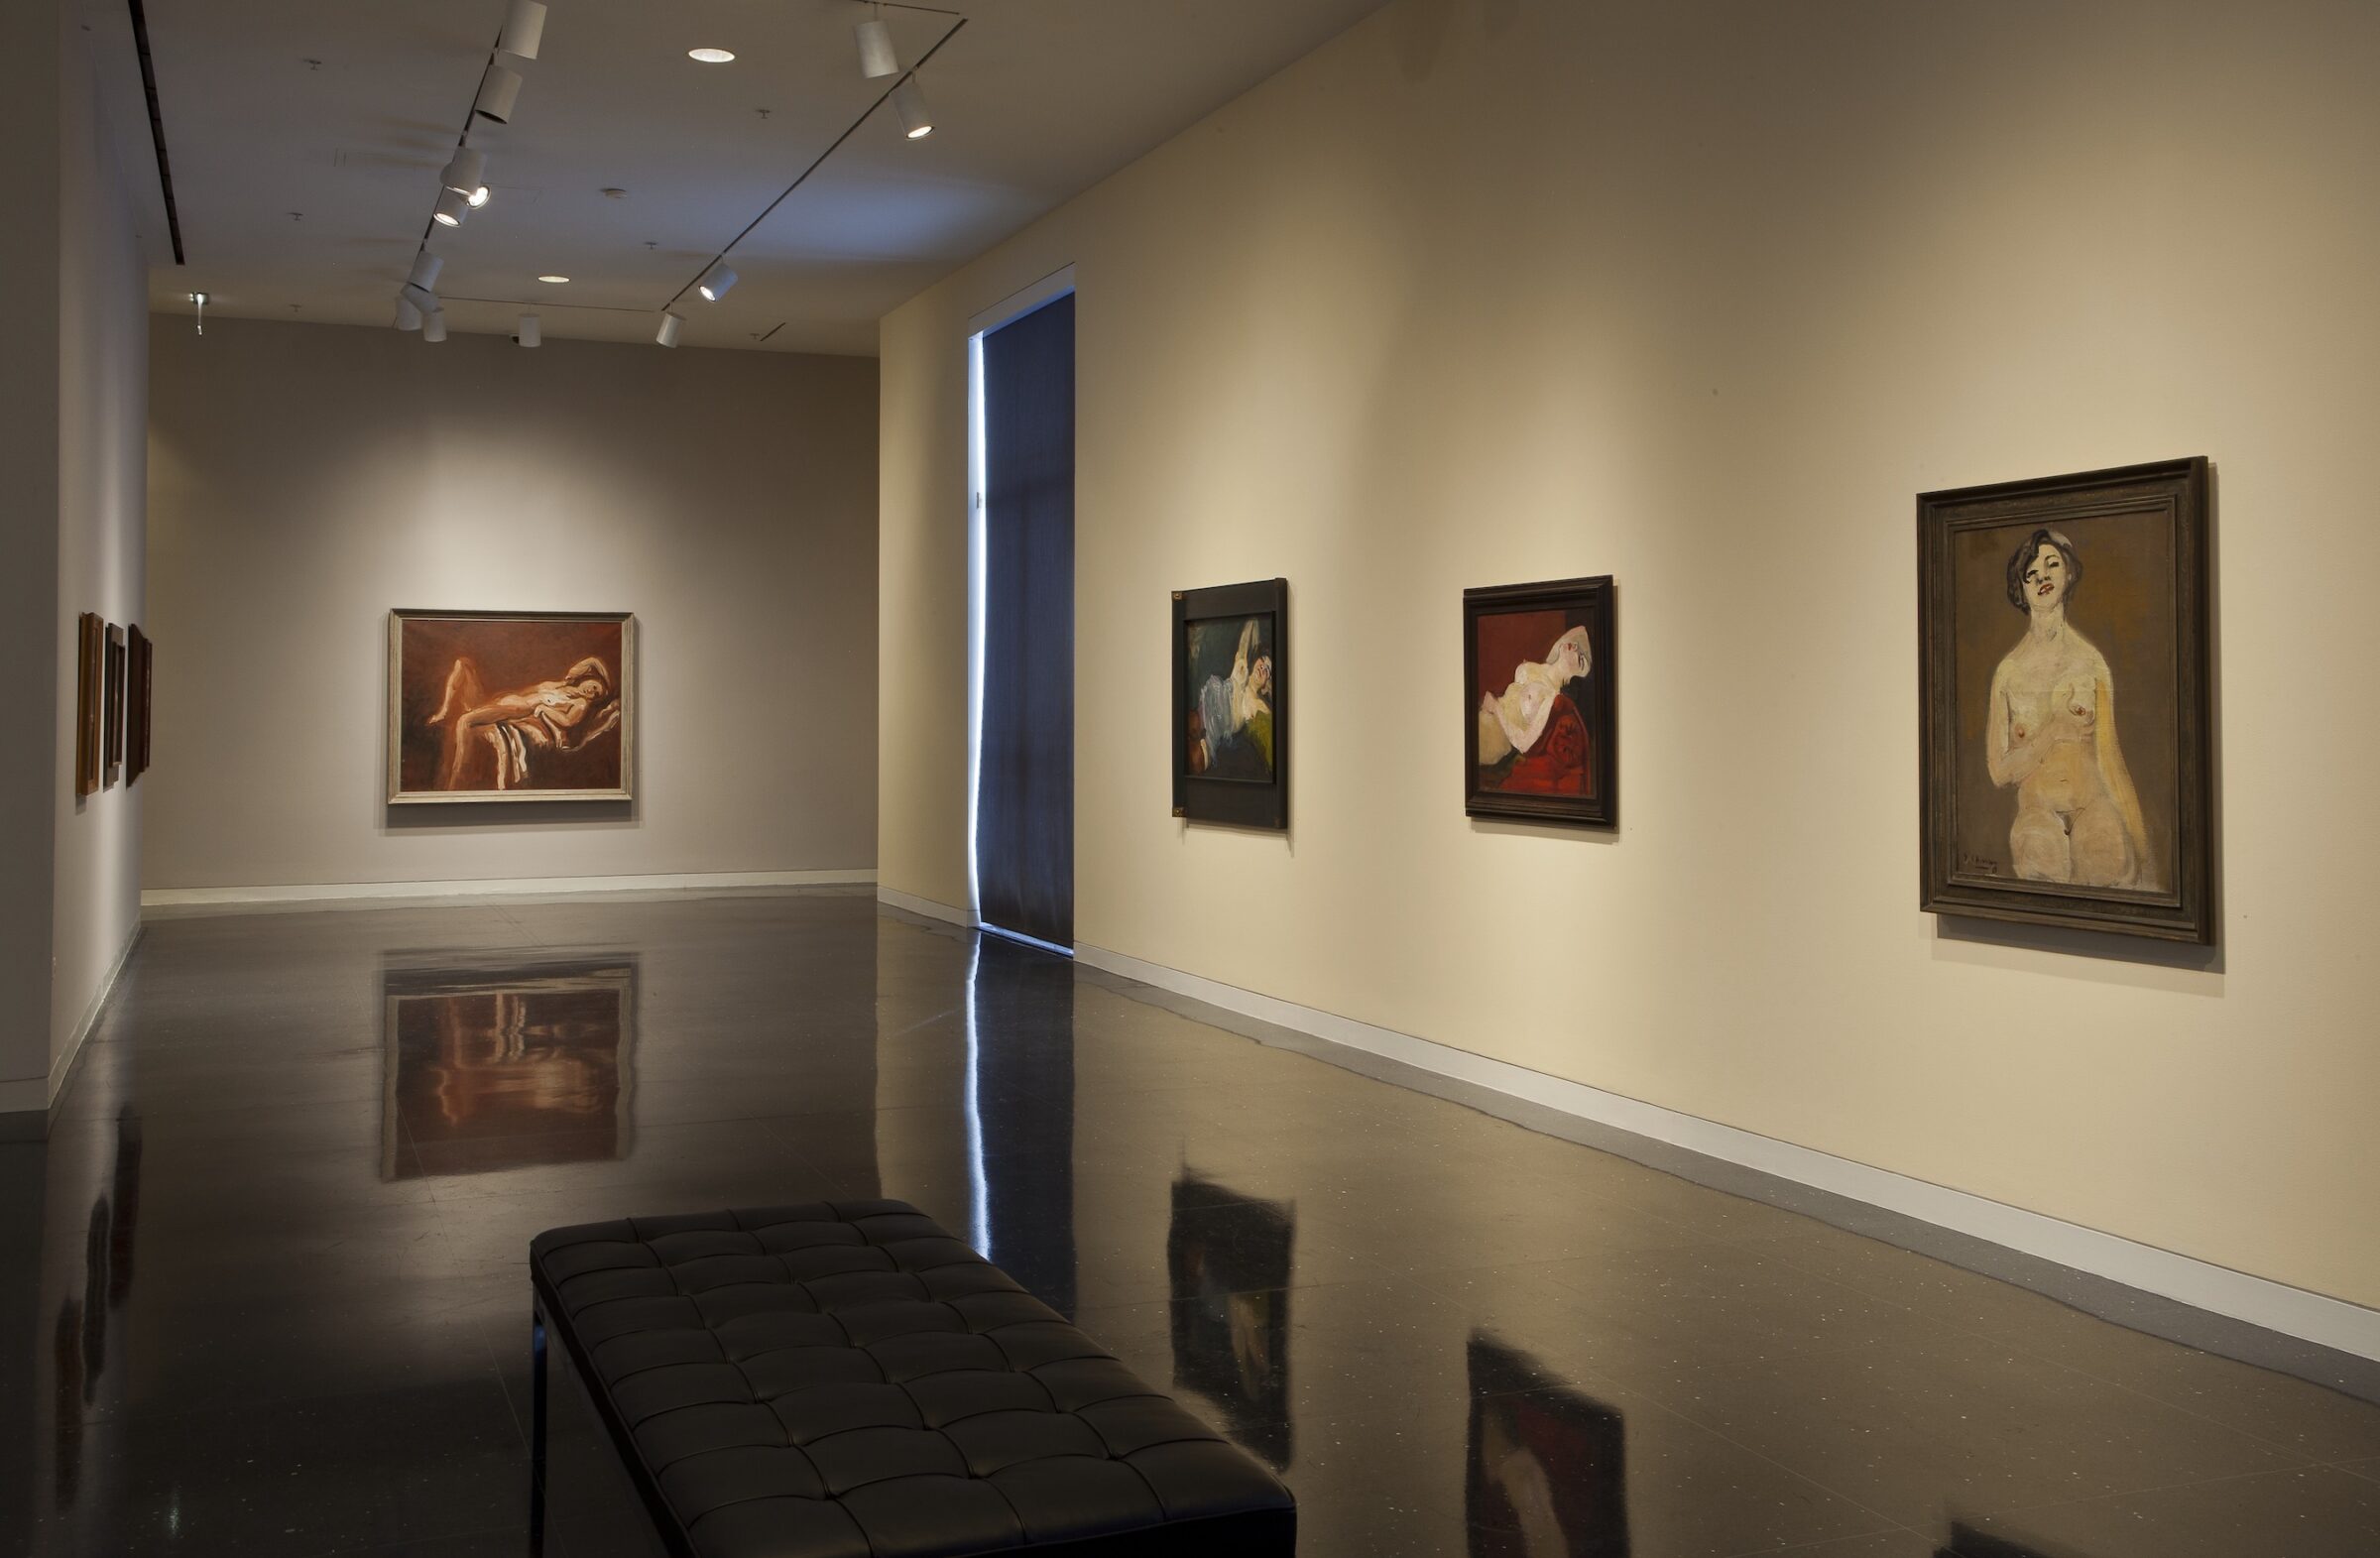 Four framed nude paintings of varying size hang in a beige gallery. The painting furthest from the viewer depicts a reclining nude figure and hangs centered on the wall. A cushioned black bench sits in the gallery closest to the viewer.